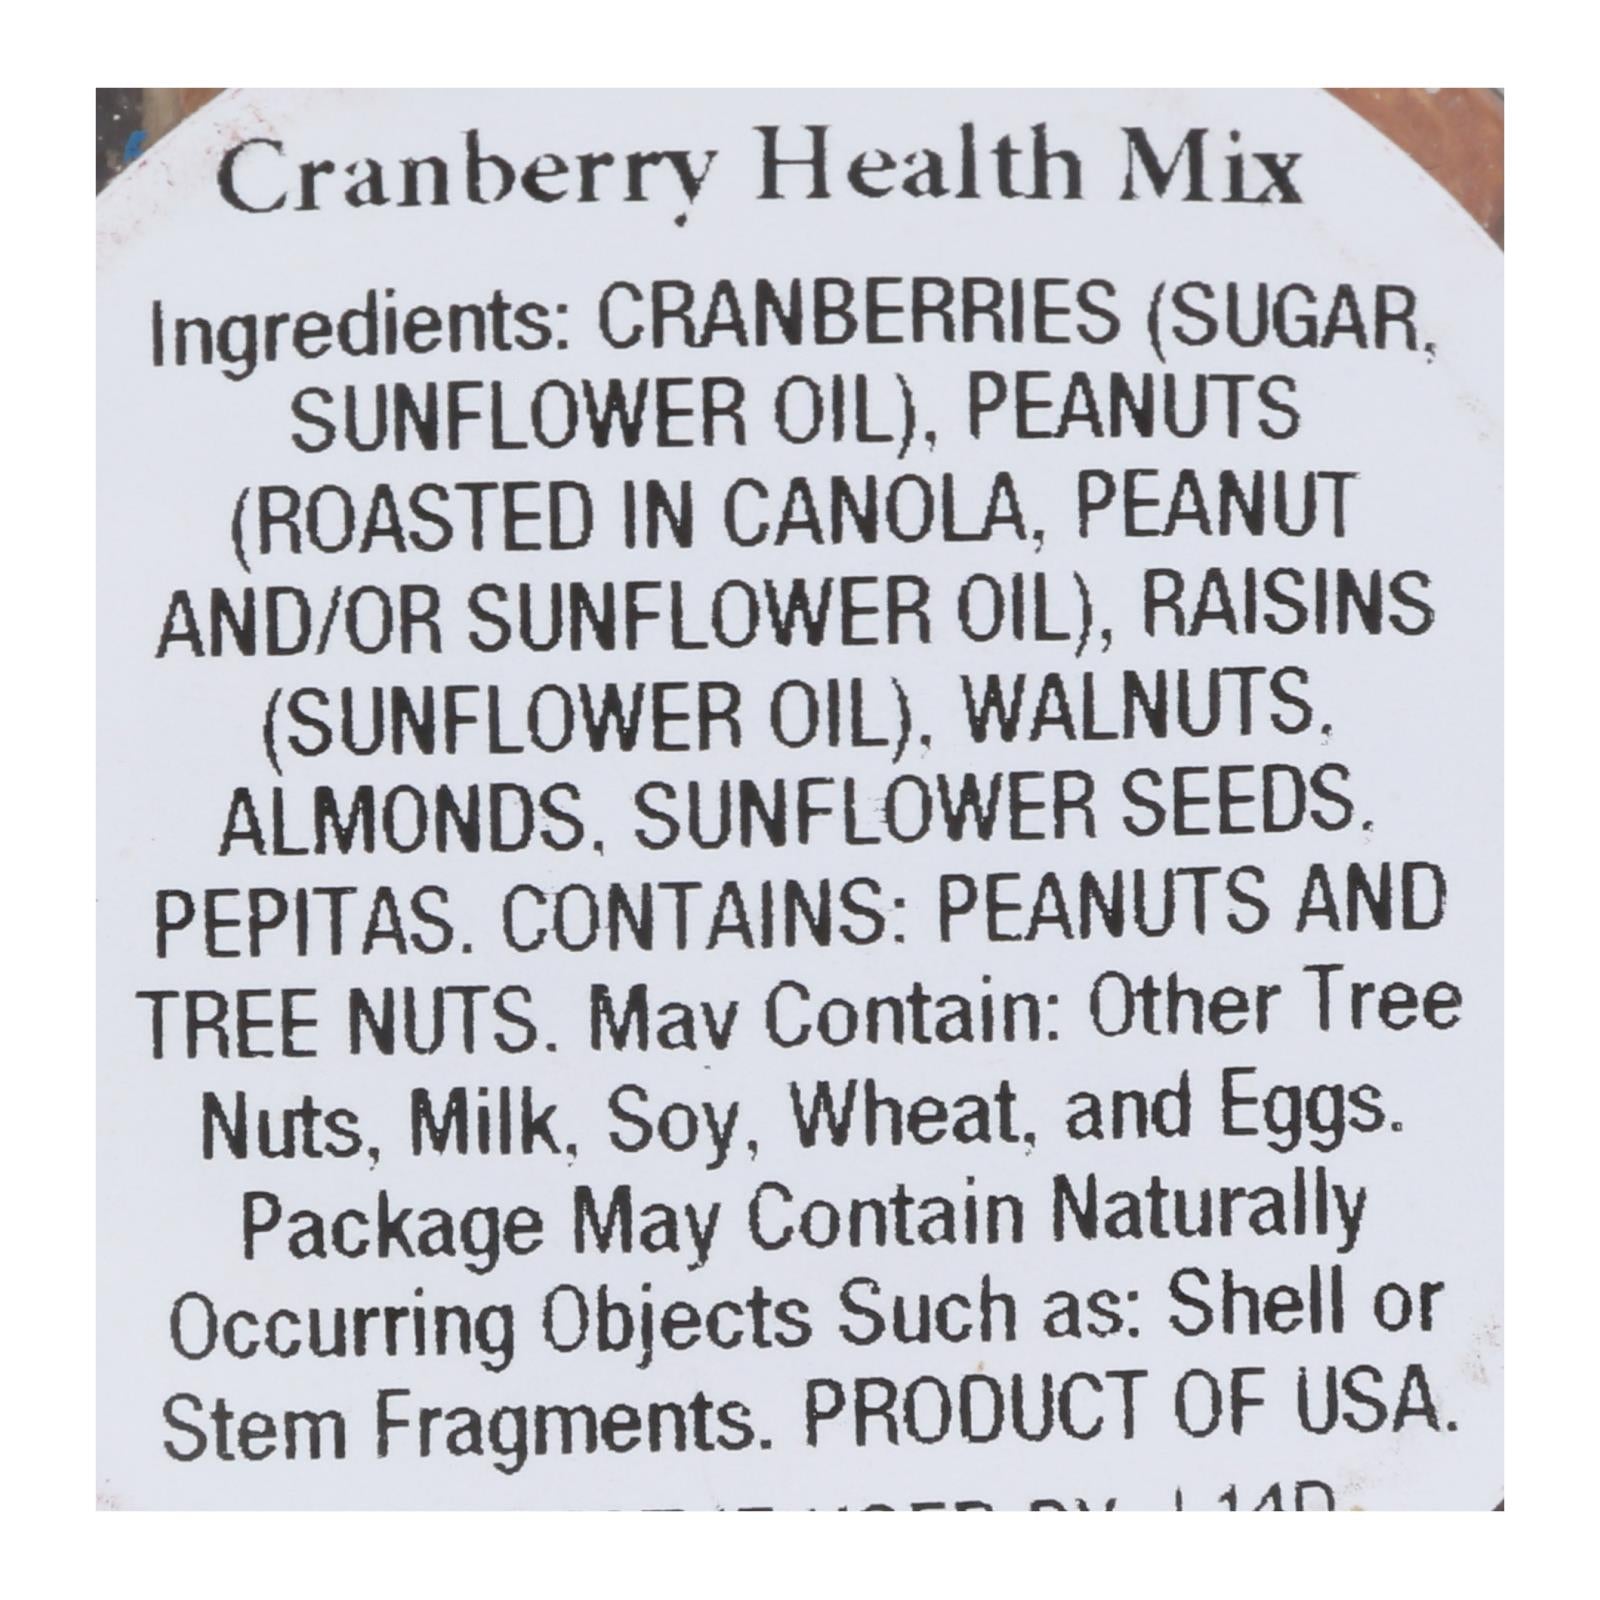 Aurora Natural Products, Aurora Natural Products - Caramel Cup Cranberry Health Mix - Case of 12 - 7 OZ (Pack of 12)